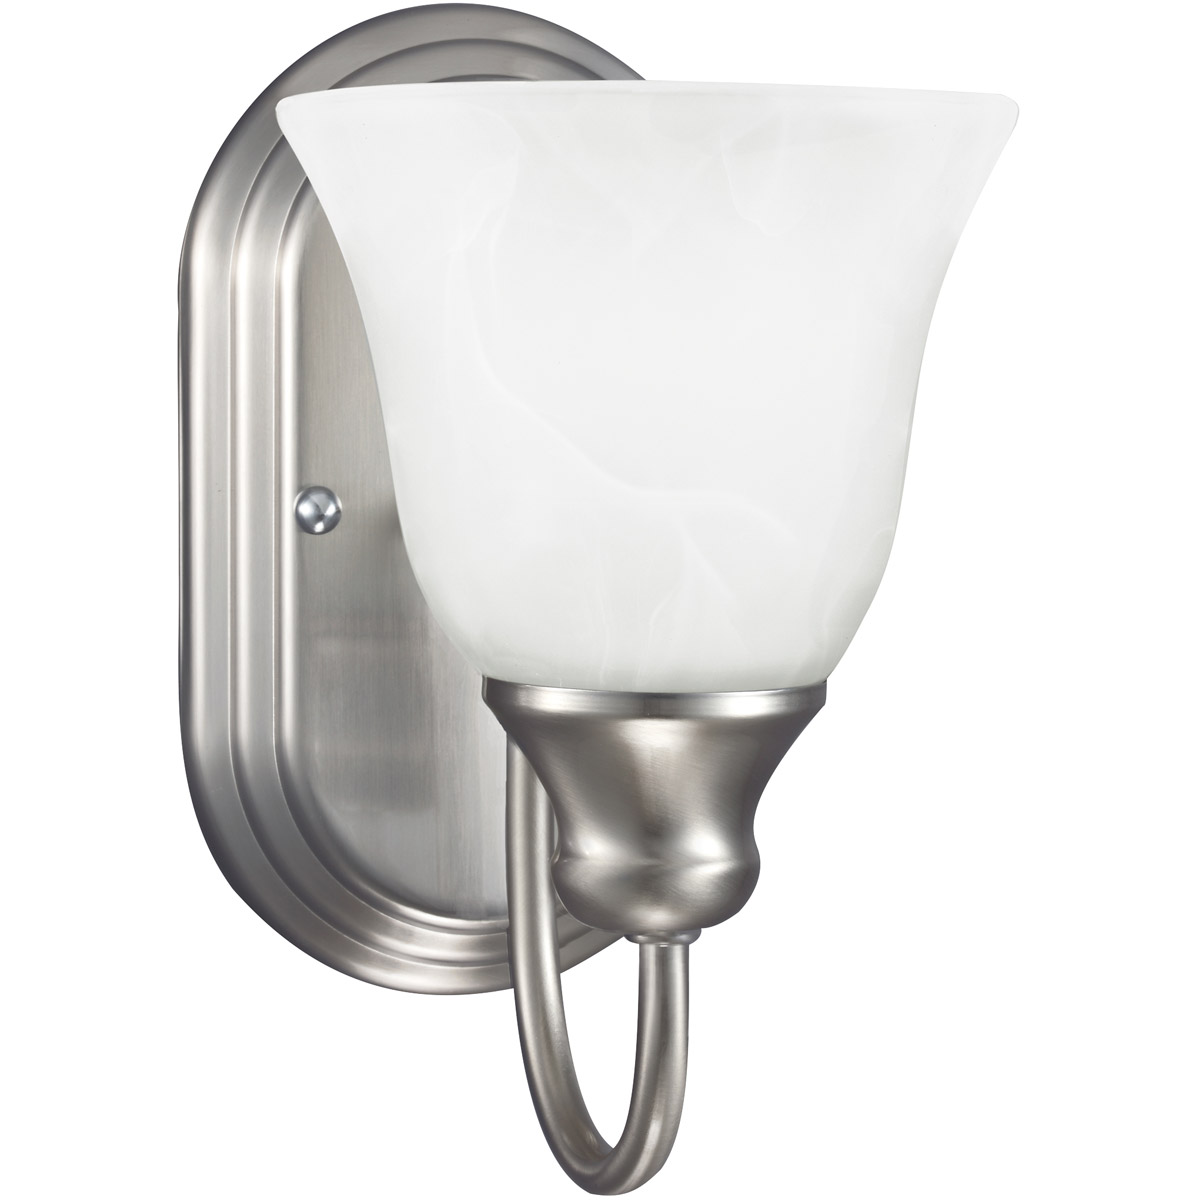 Sea Gull 41939-962 Windgate 1 Light 6 inch Brushed Nickel Wall Sconce Wall Light